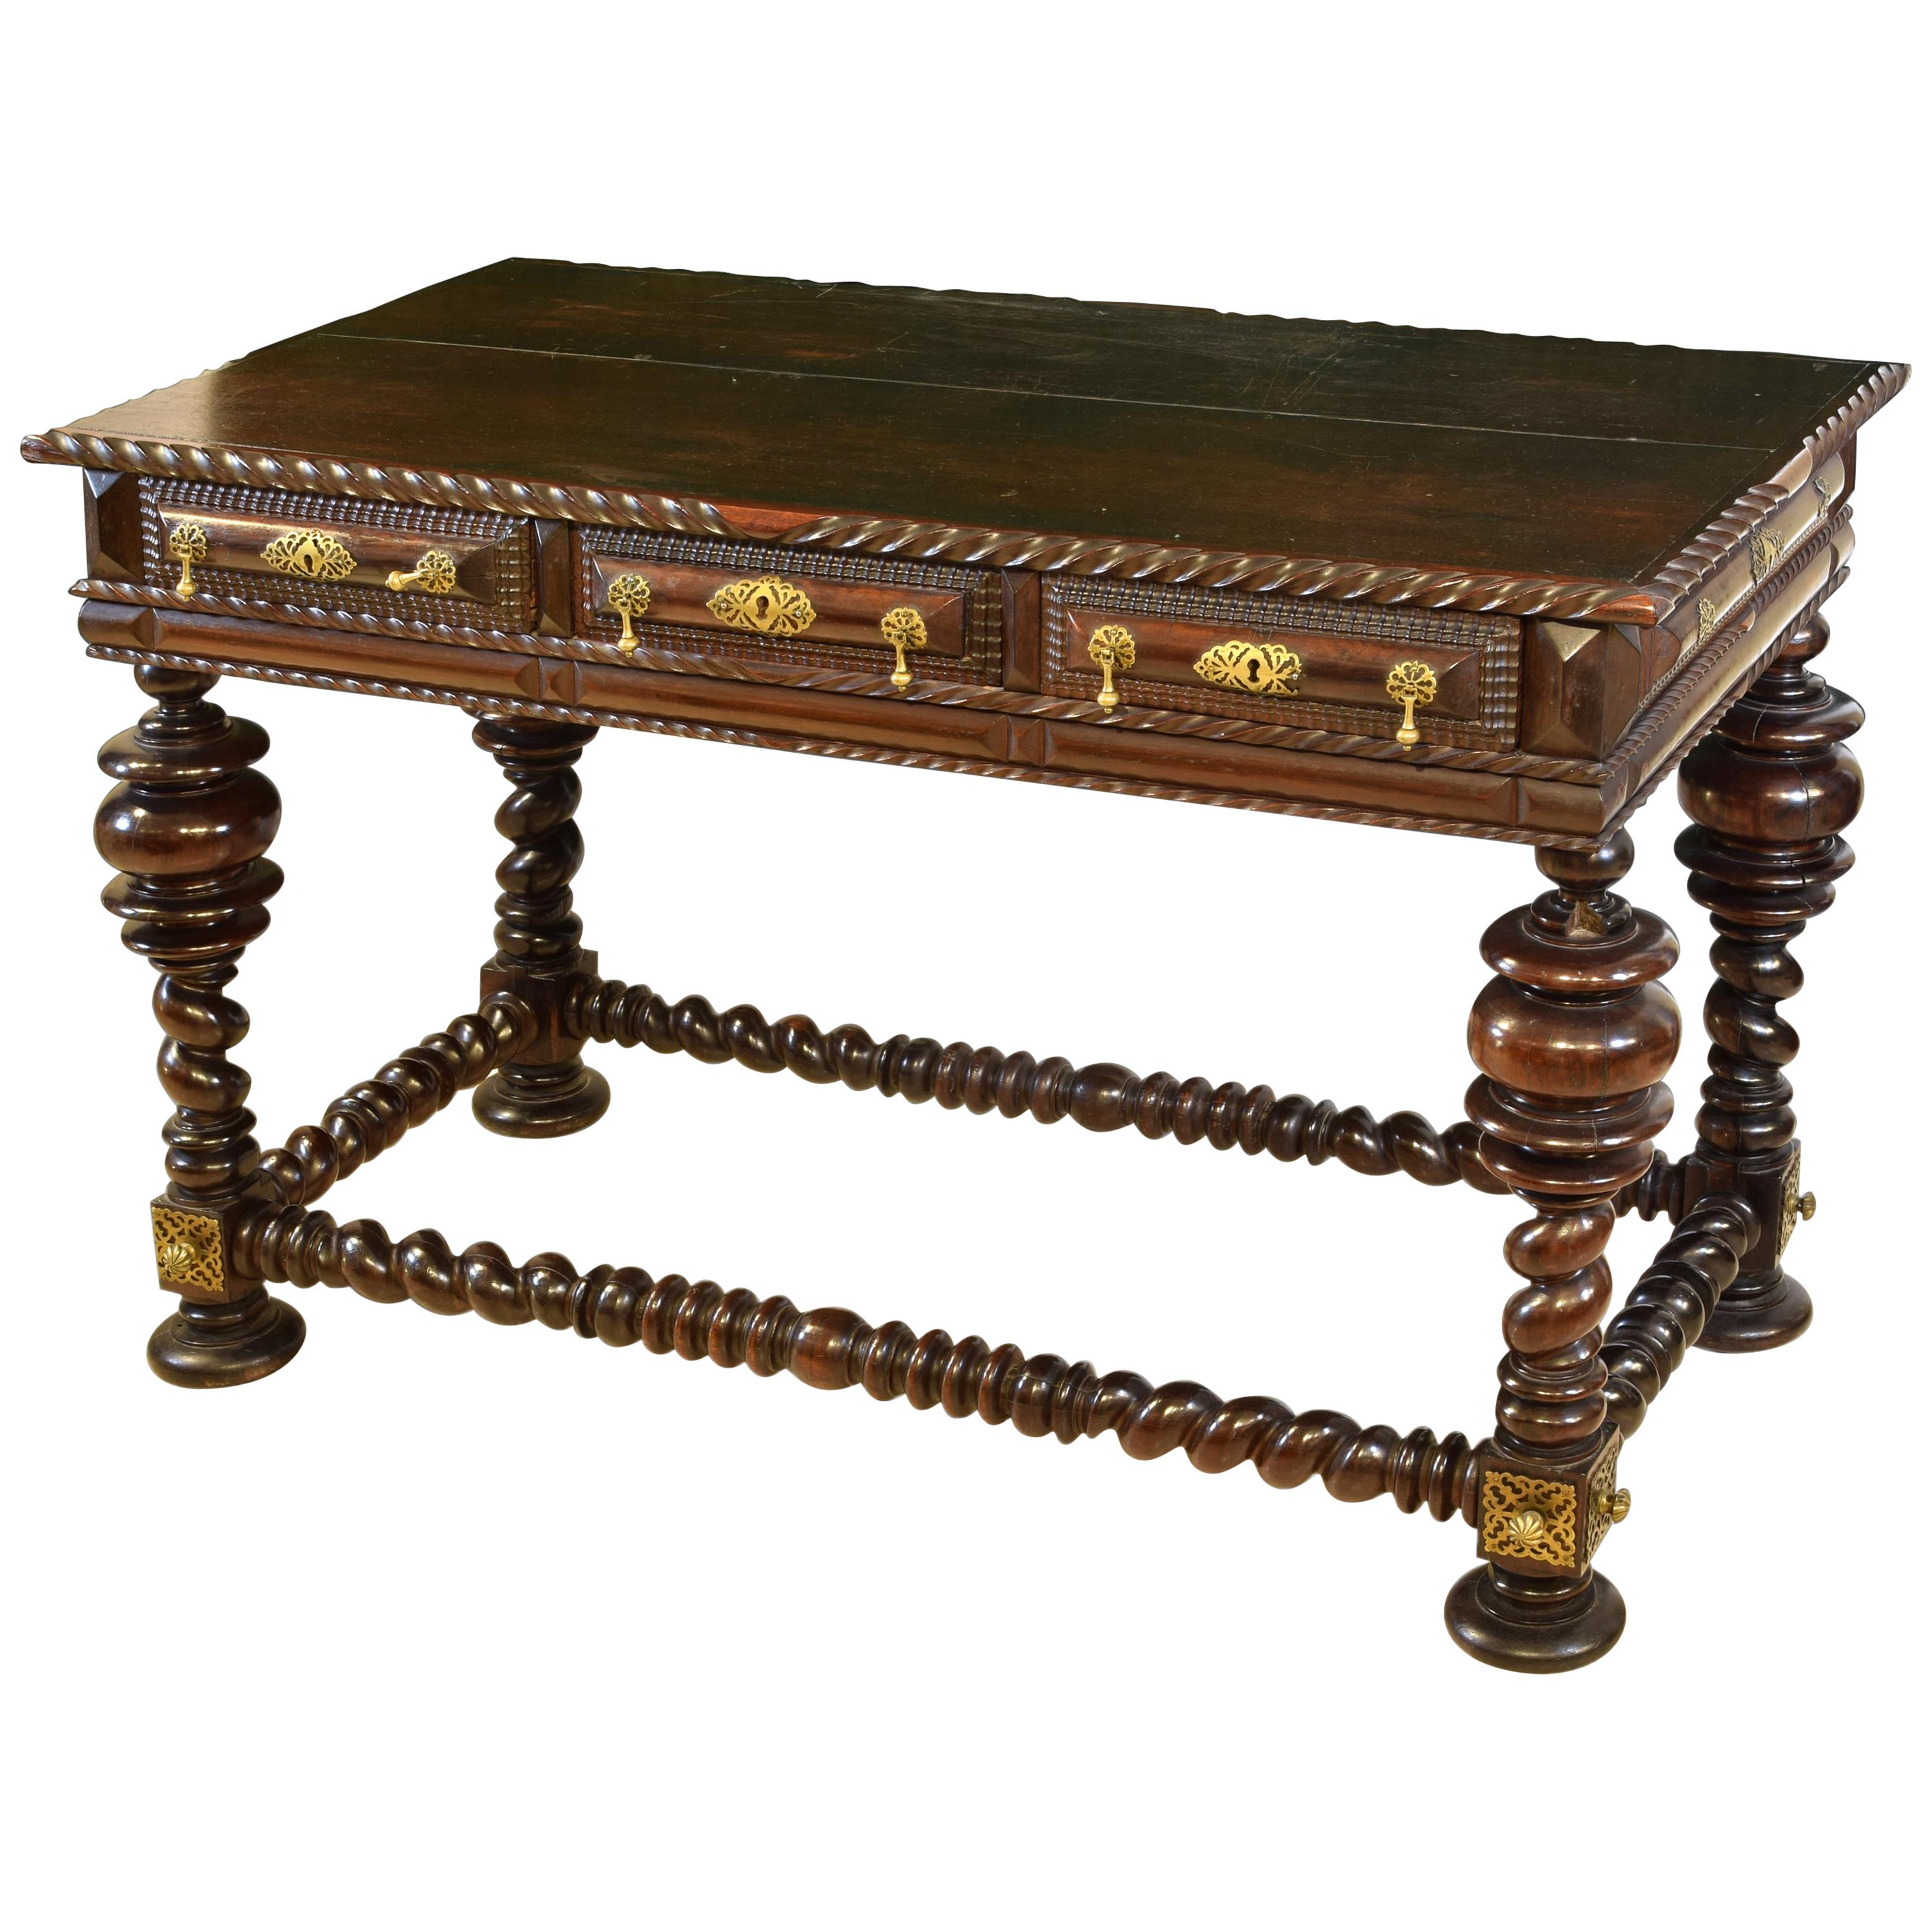 Table, Palosanto 'Rose Wood or Holy Wood', Portuguese School, 18th and 19th C